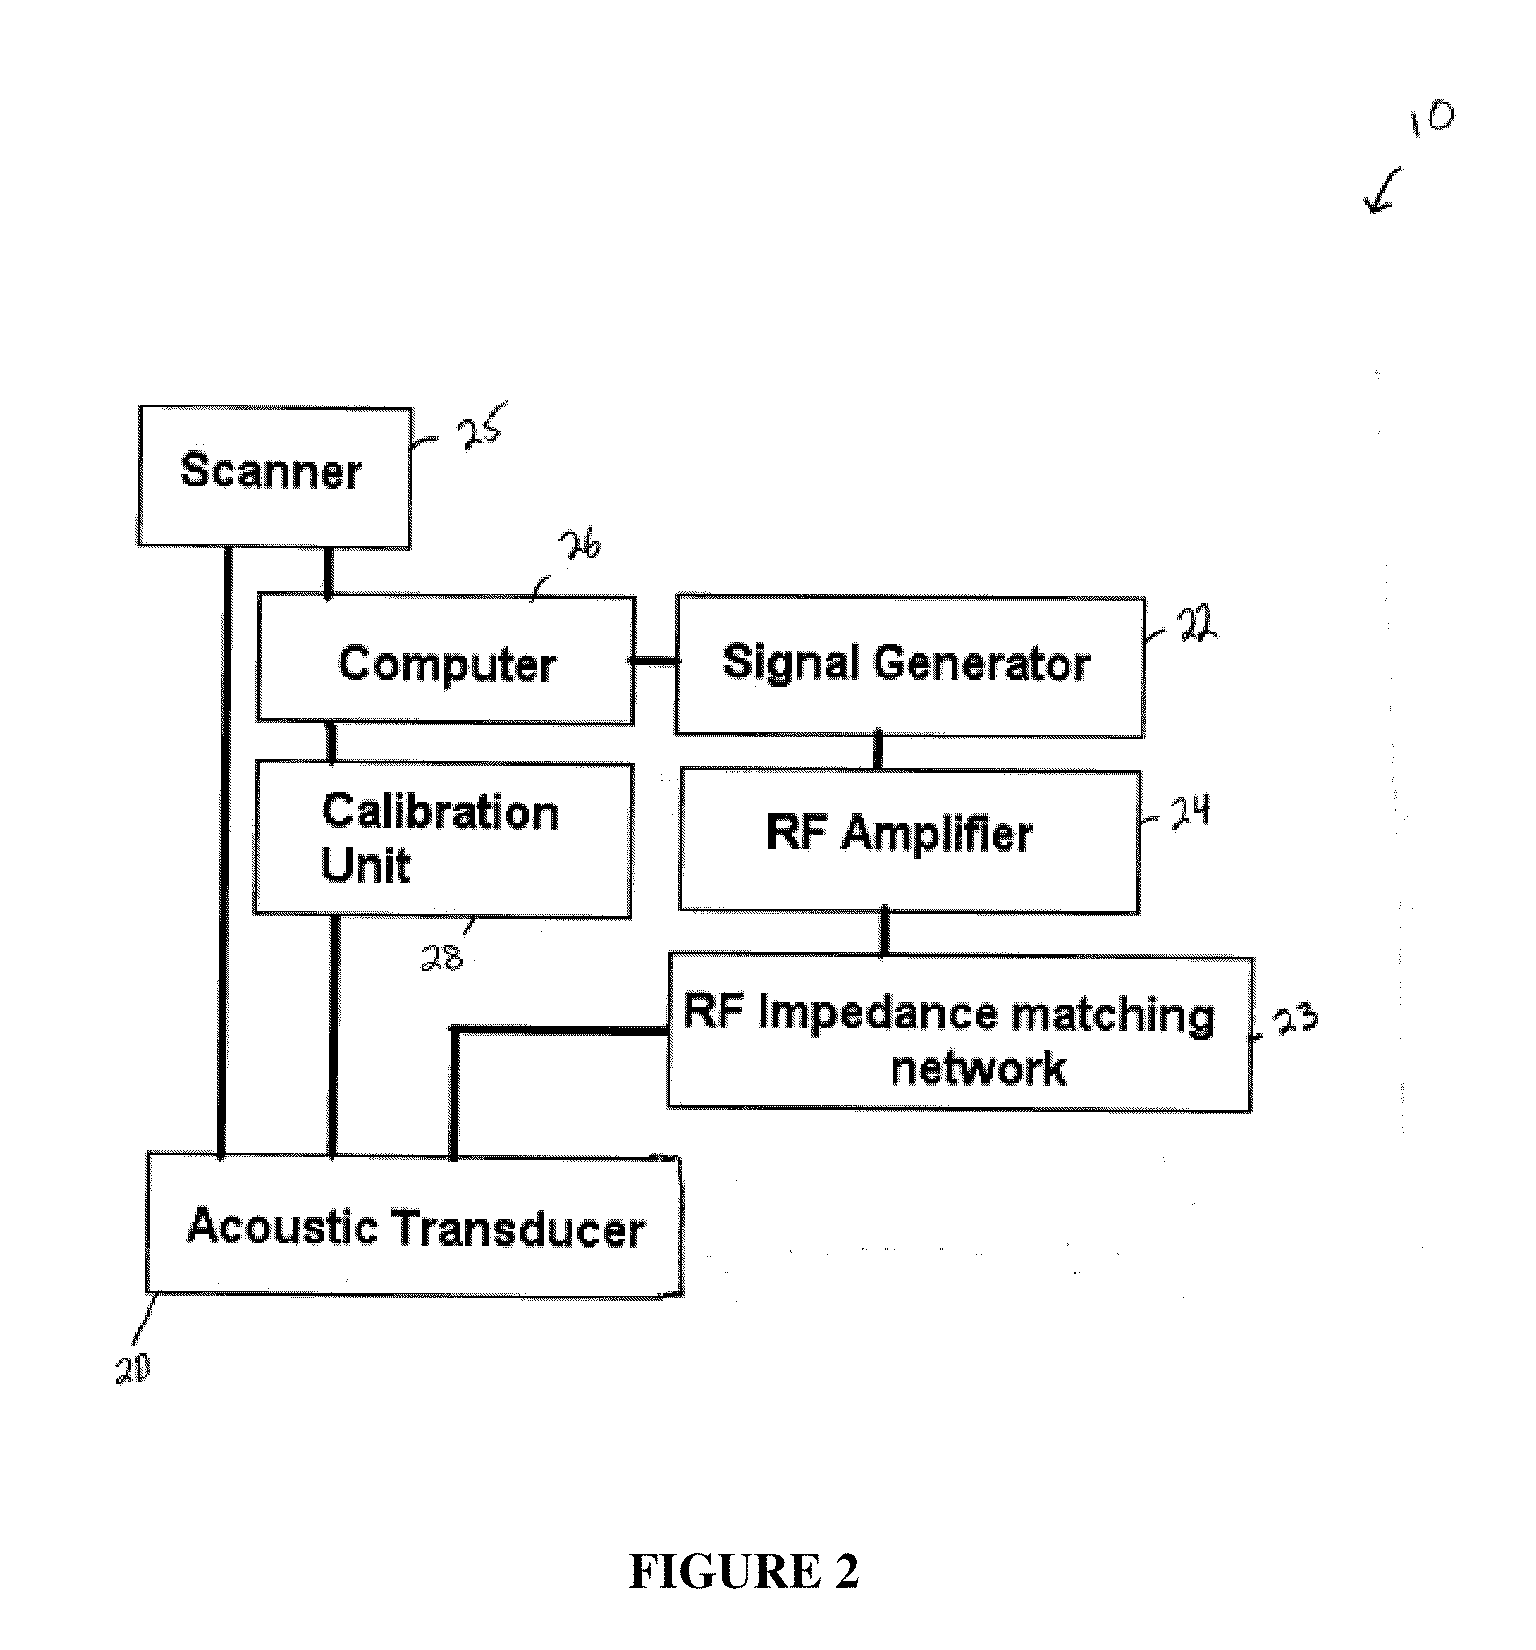 System and method of treating tissue with ultrasound energy